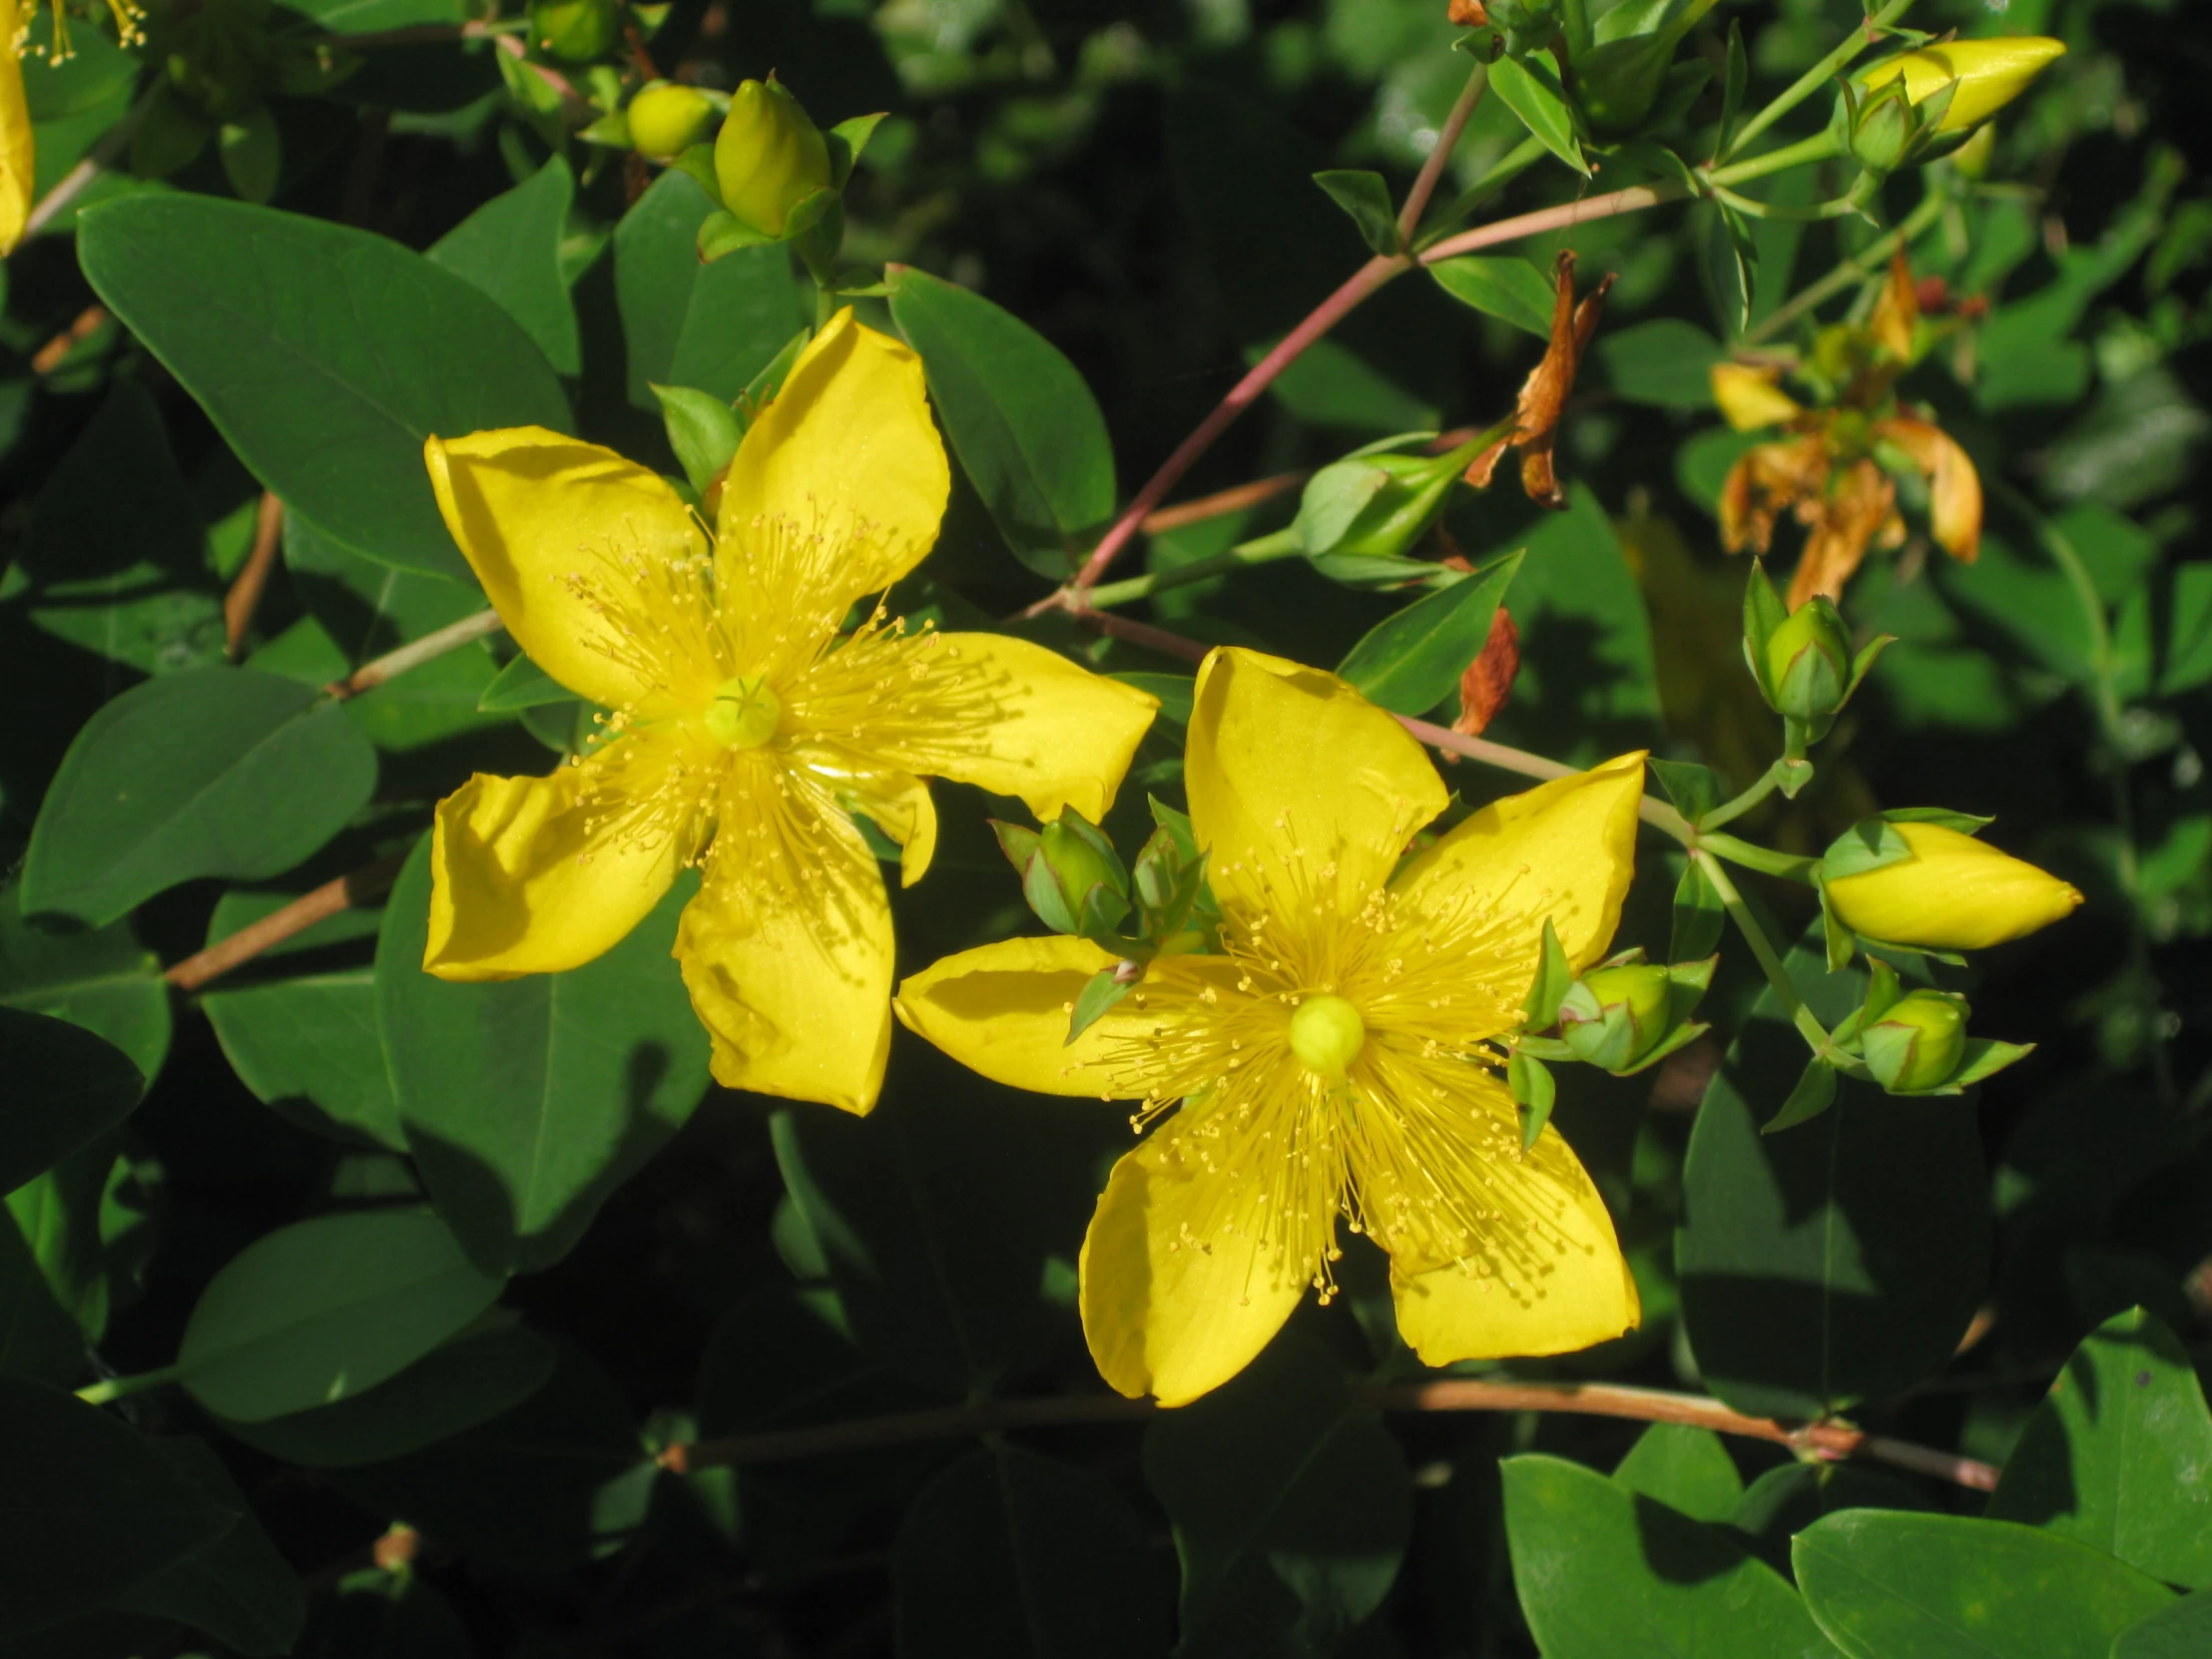 a small yellow flower in the midst of large green leaves